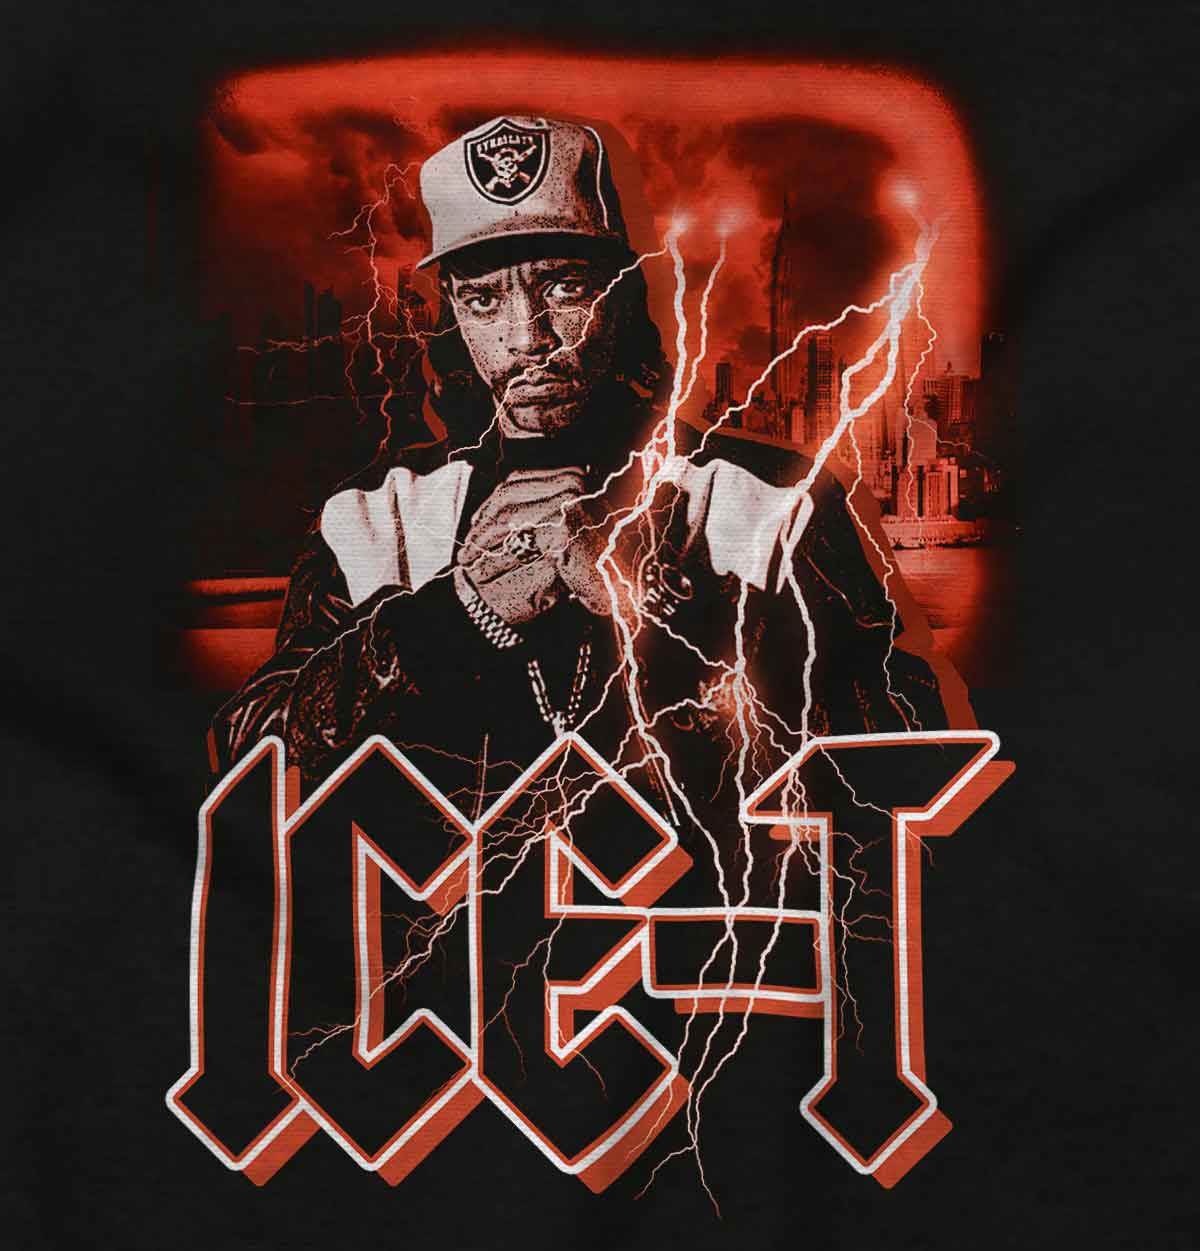 This image shows a graffiti-style picture of ICE-T with red skies and storms, representing rebellion and the enduring spirit of hip-hop, so embrace the vibe and let your style shine with this cool piece.